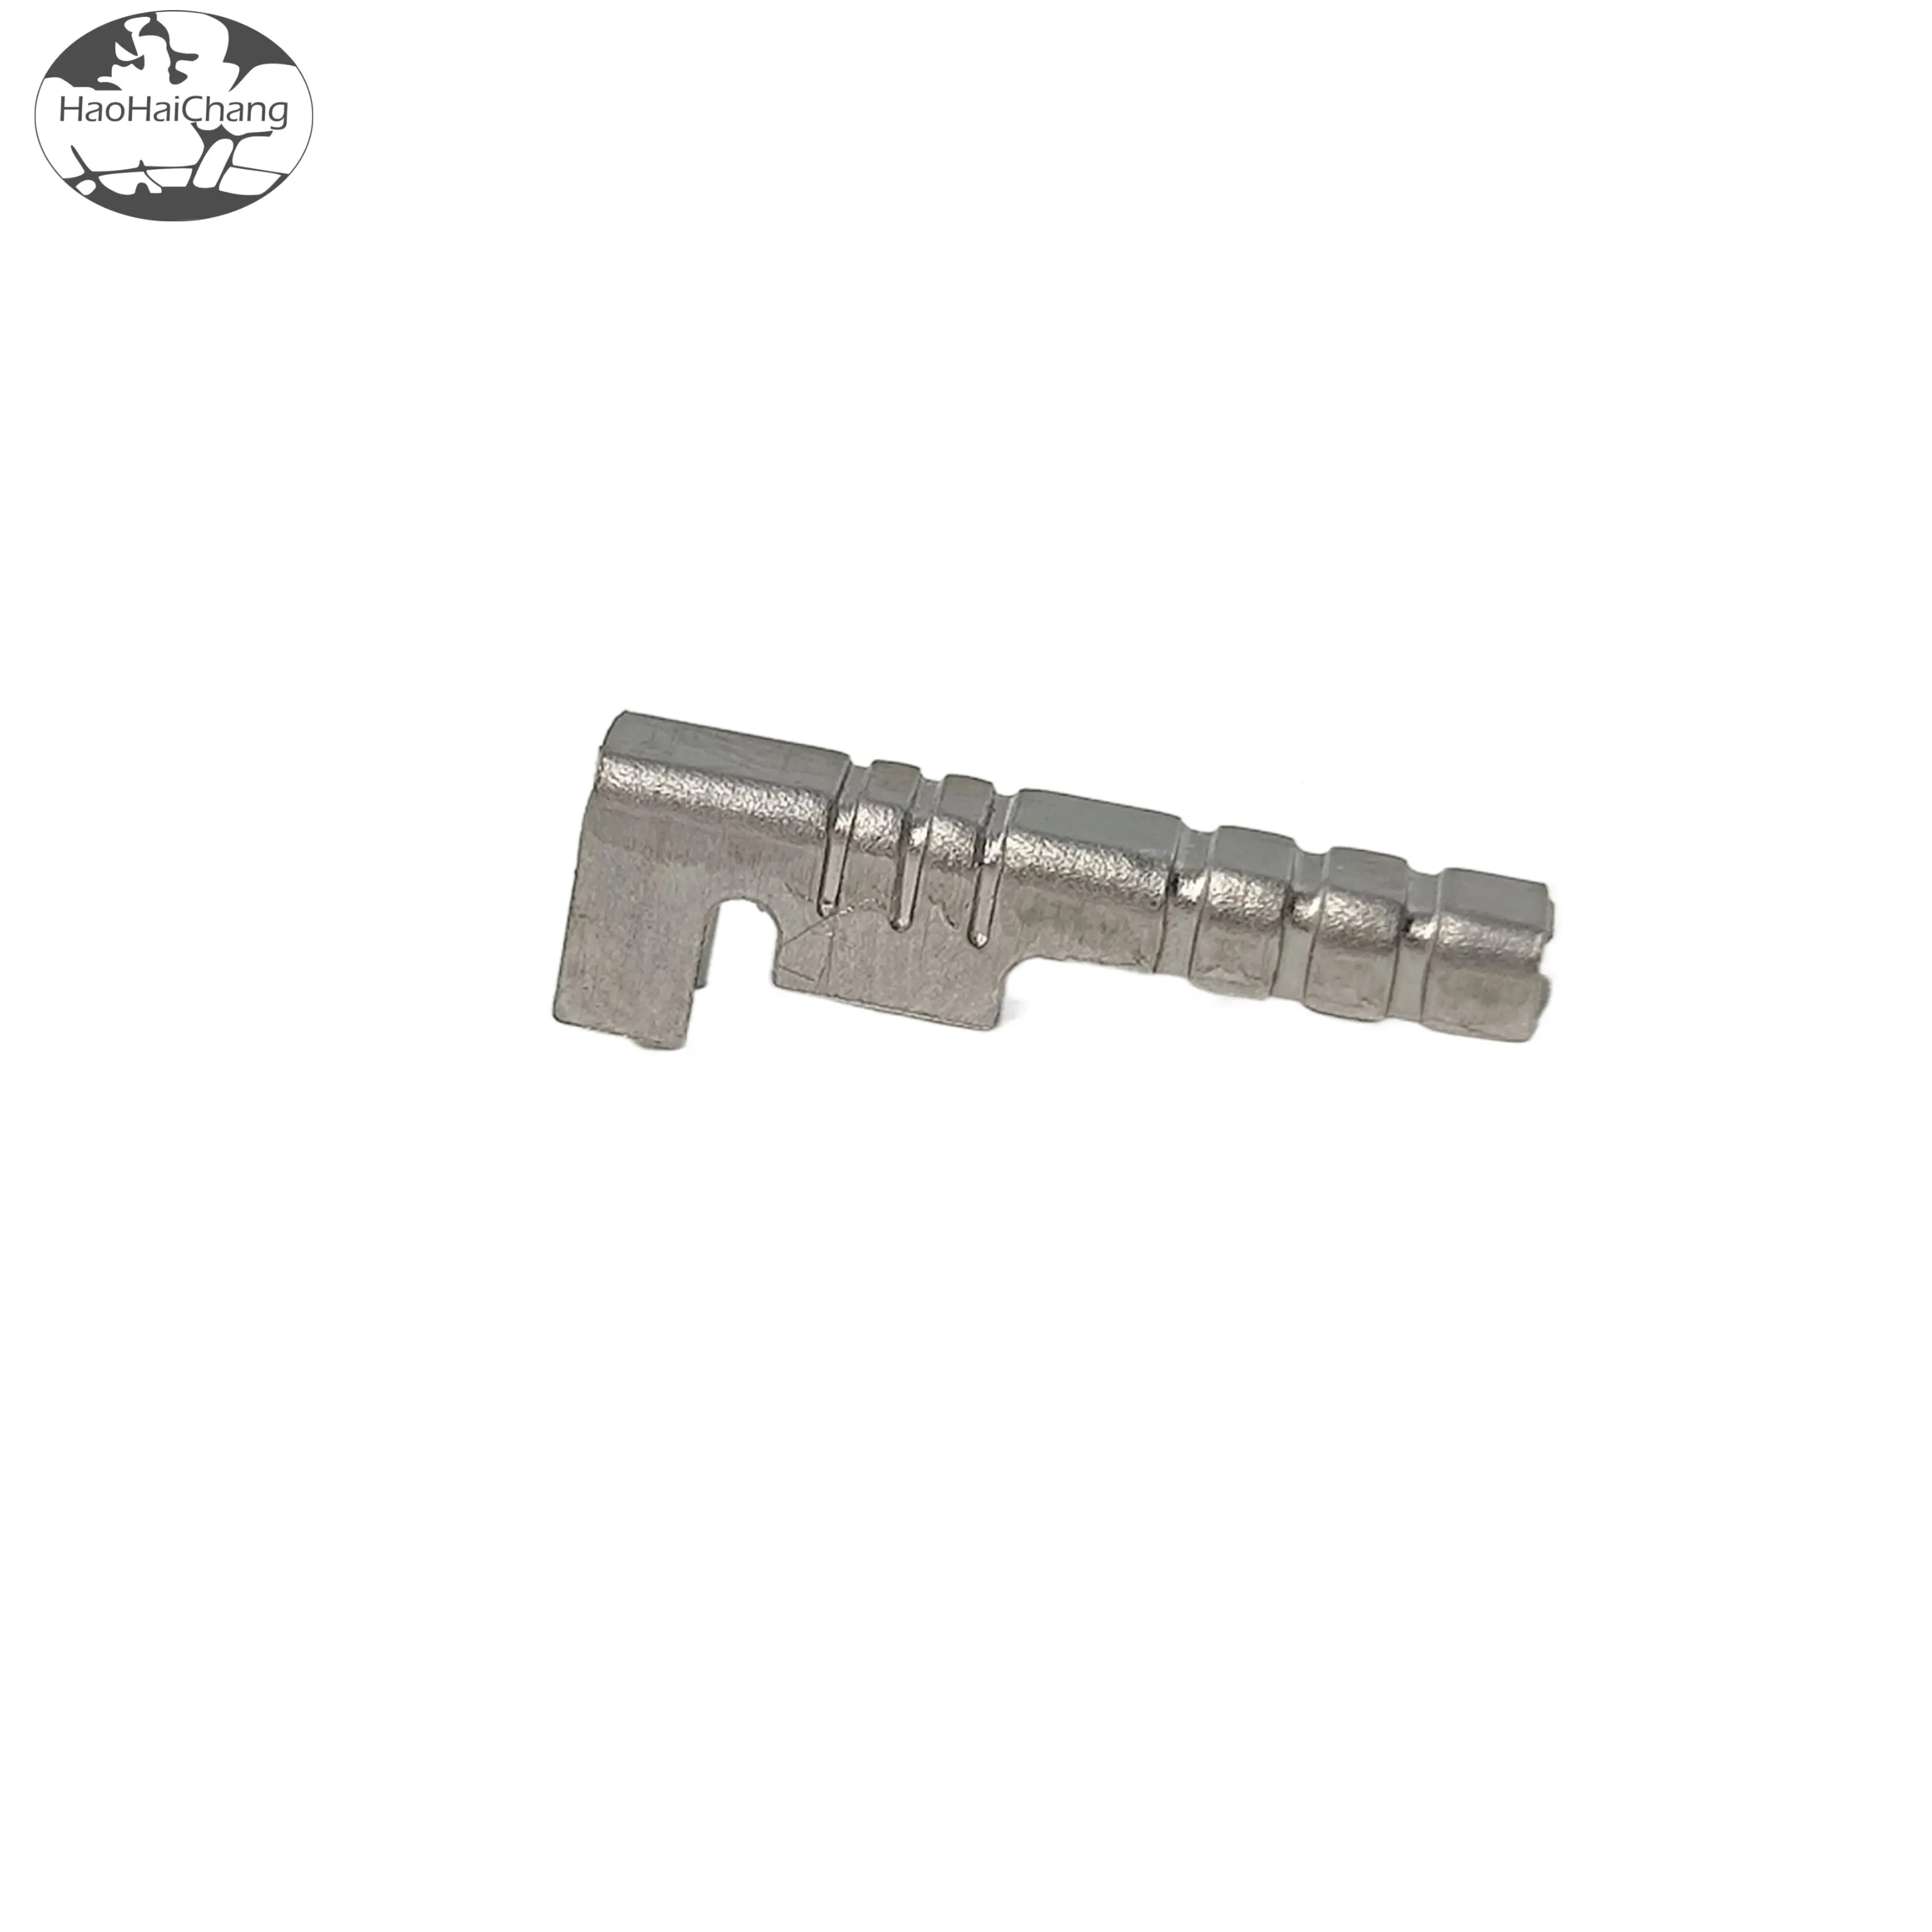 HHC-747 Terminal Block Stainless Steel Terminal Connector